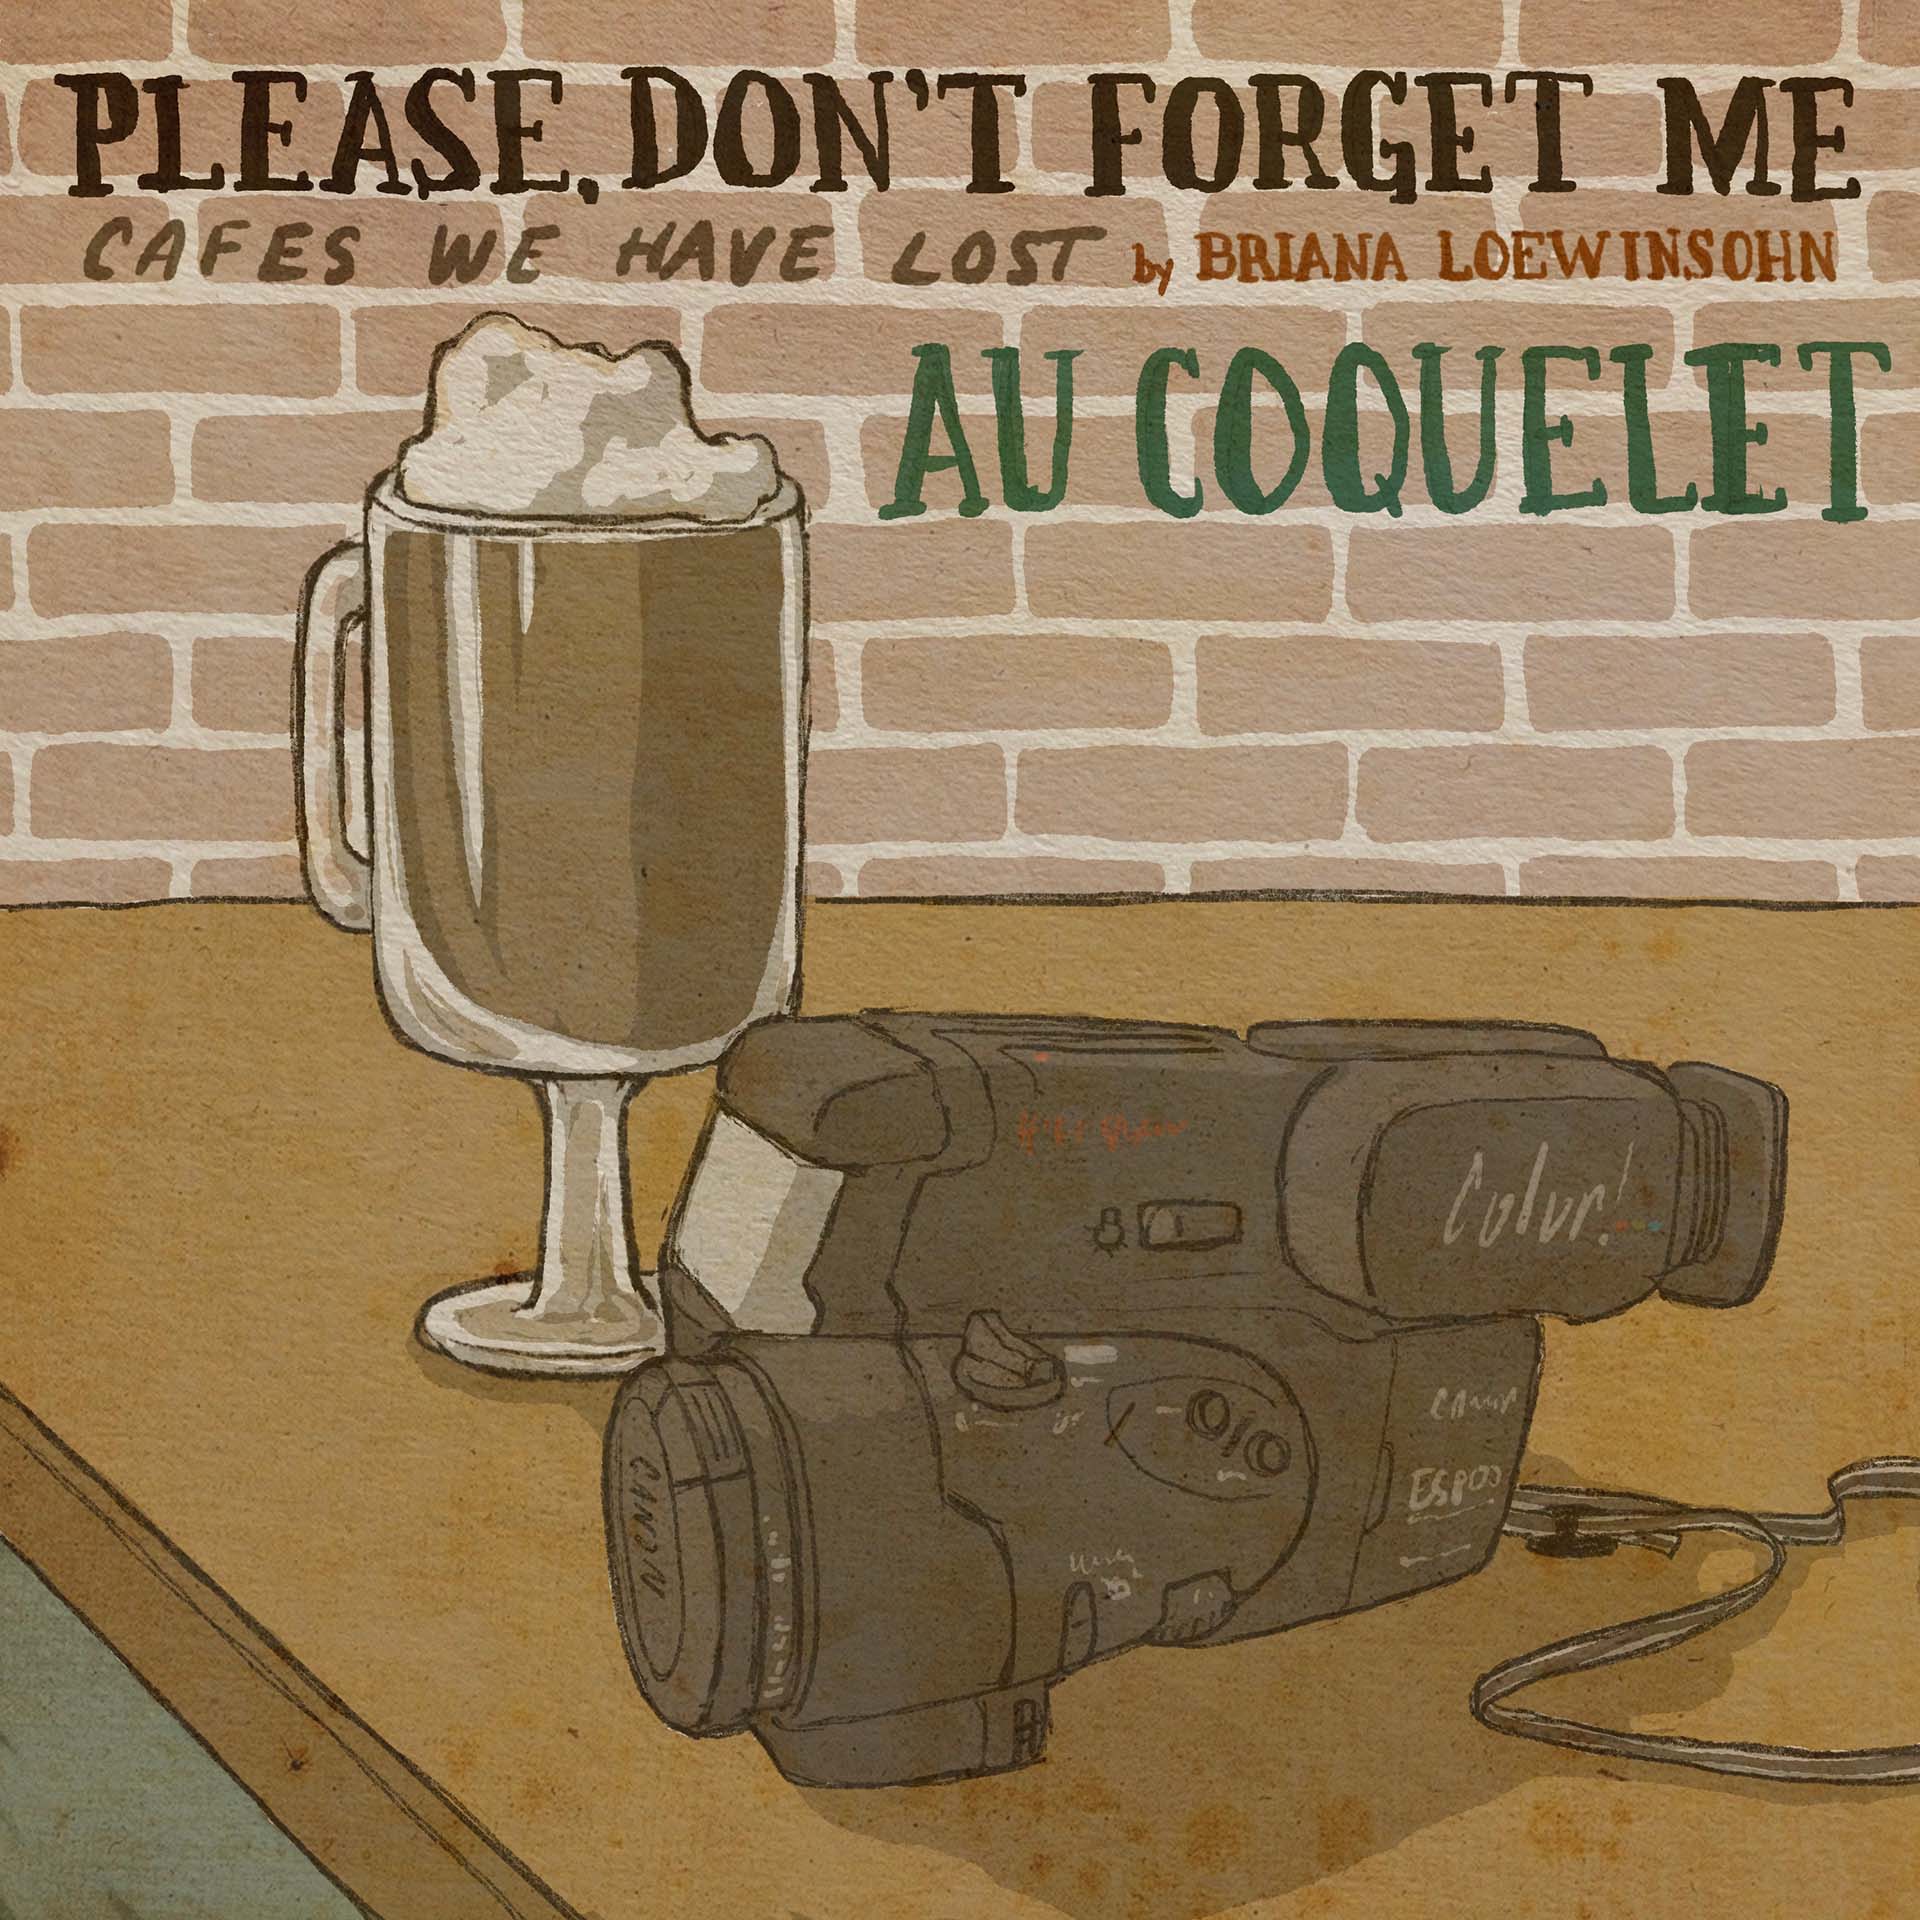 Title panel for a comic shows a glass of foam-topped hot chocolate and a camcorder on a table against a brick wall. The text reads, "Please, Don't Forget Me: Cafes We Have Lost" and underneath that, "Au Coquelet".